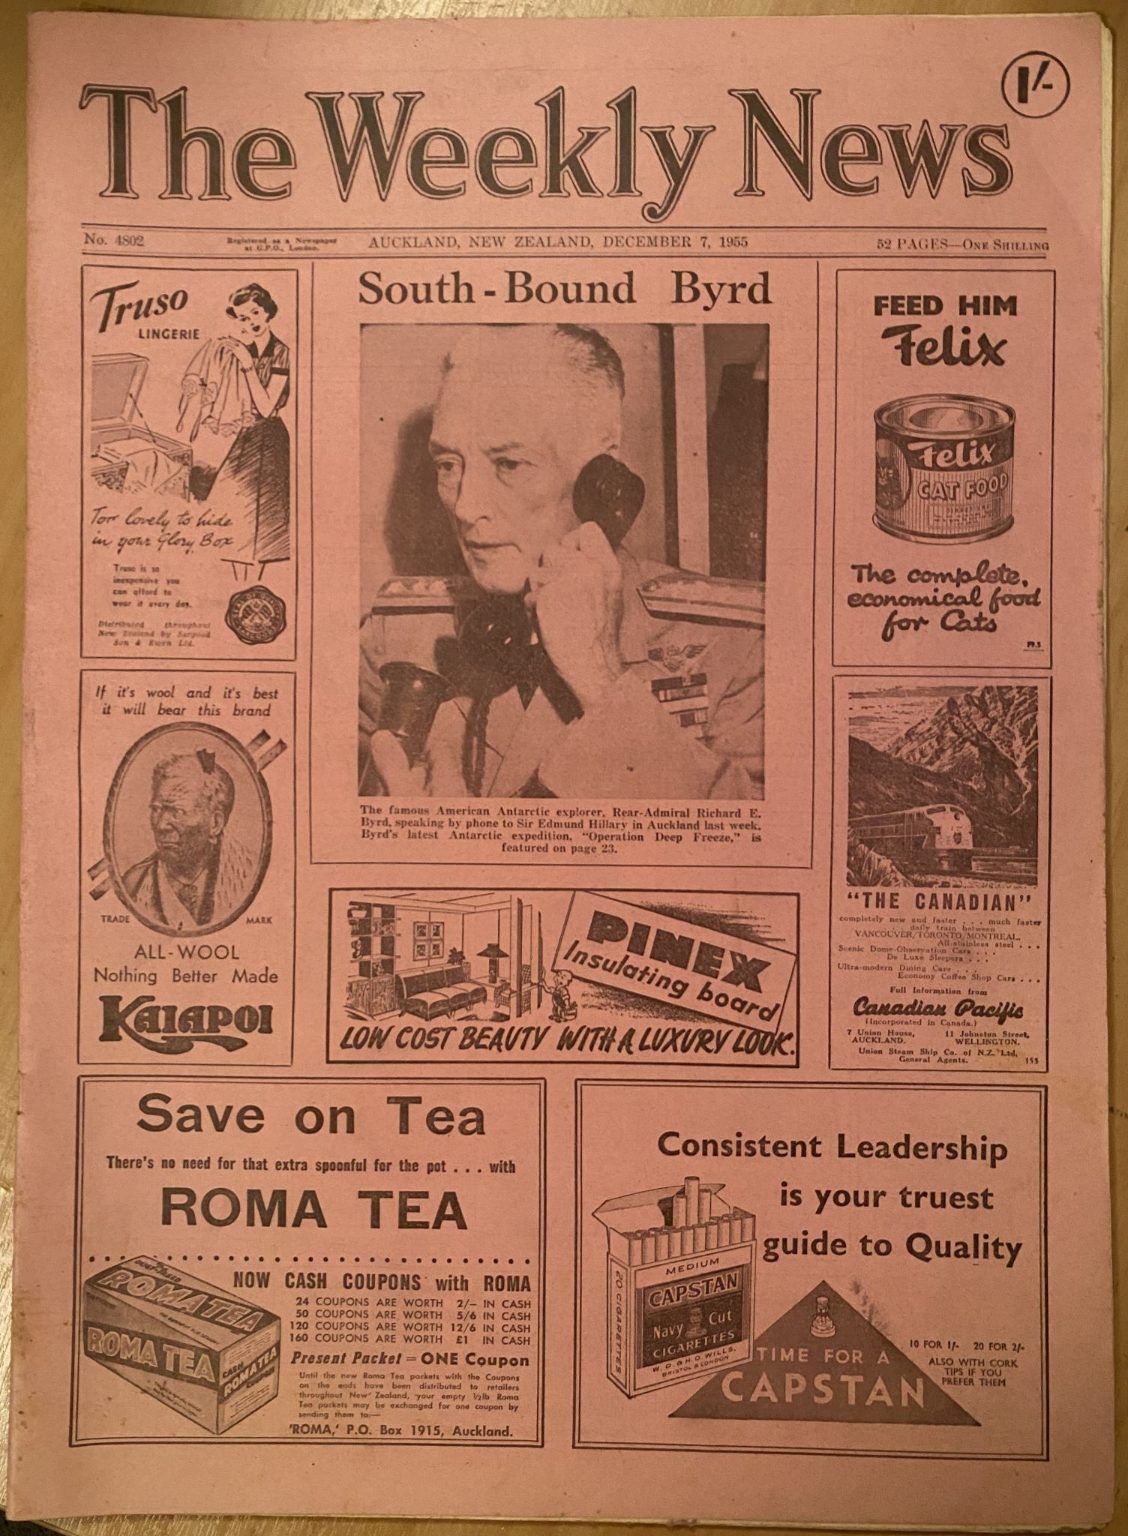 OLD NEWSPAPER: The Weekly News - No. 4802, 7 December 1955